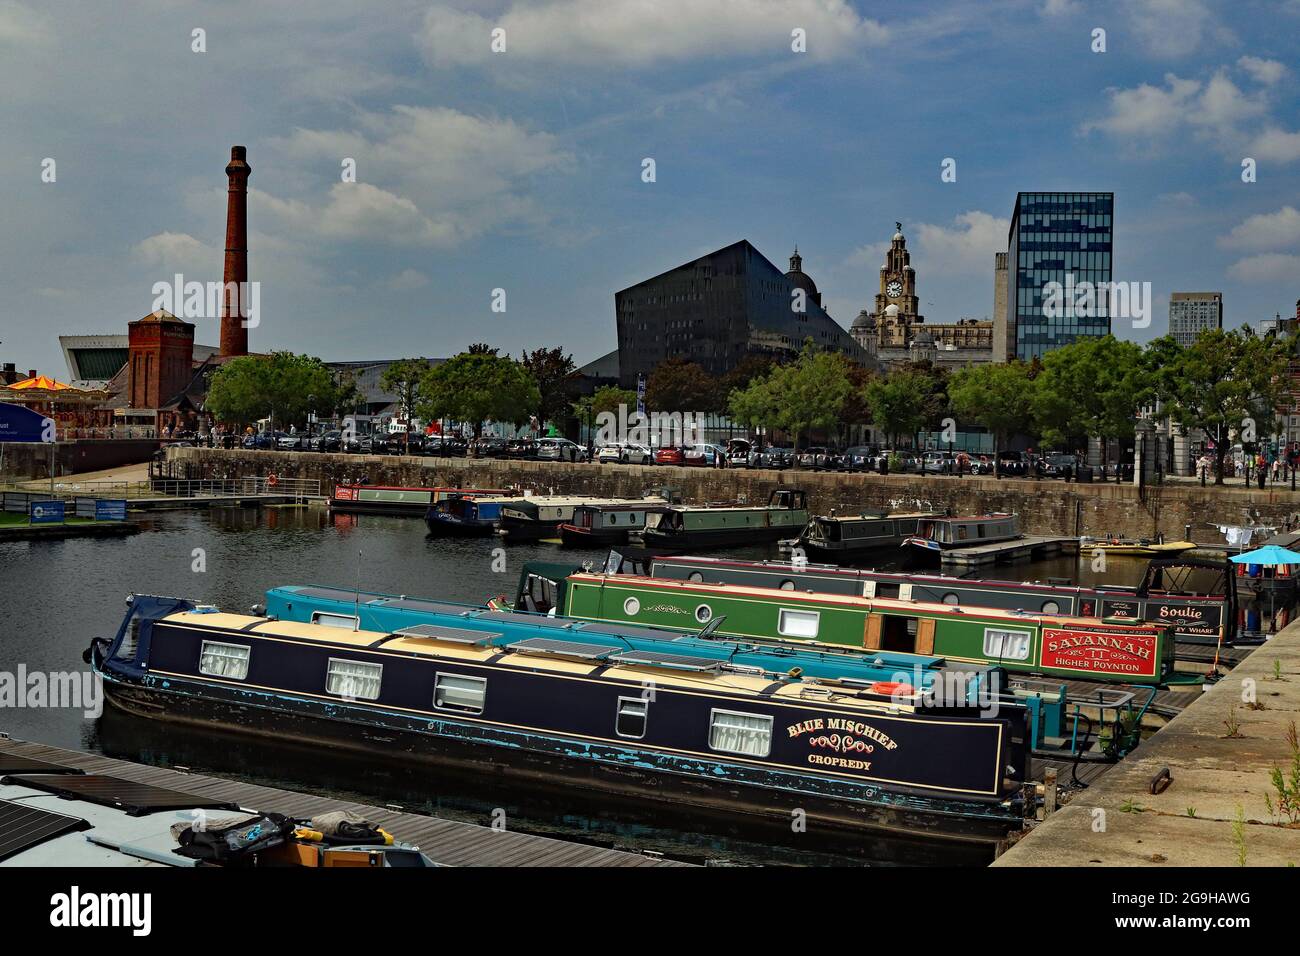 Summer in the city, canal boats moored in Salthouse dock Liverpool overlooked by the pier head buildings, including the Liver buildings Stock Photo